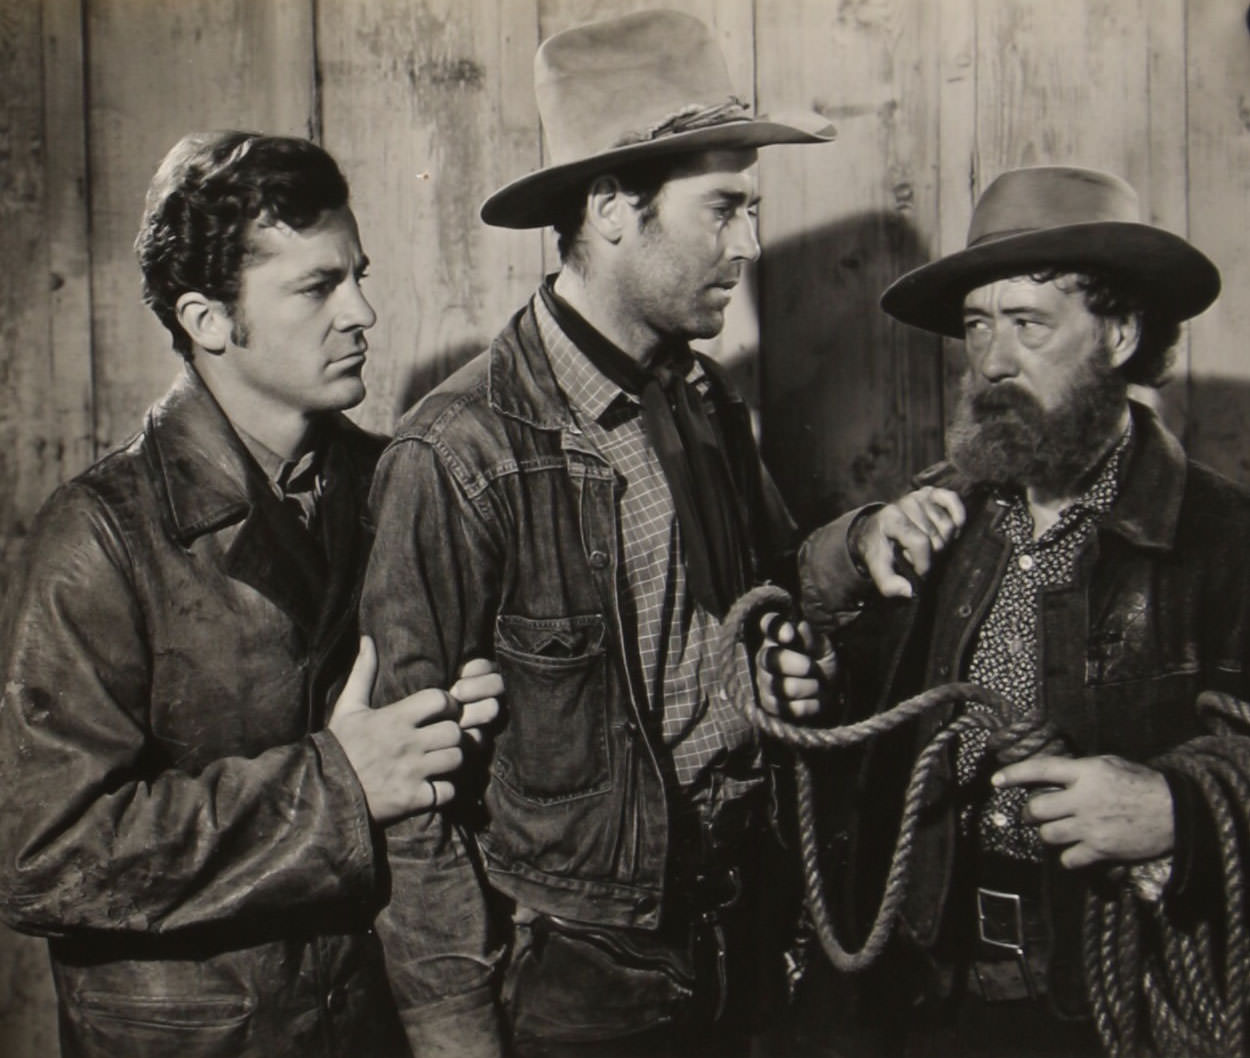 Henry Fonda, Dana Andrews, and Paul E. Burns in The Ox-Bow Incident (1942)